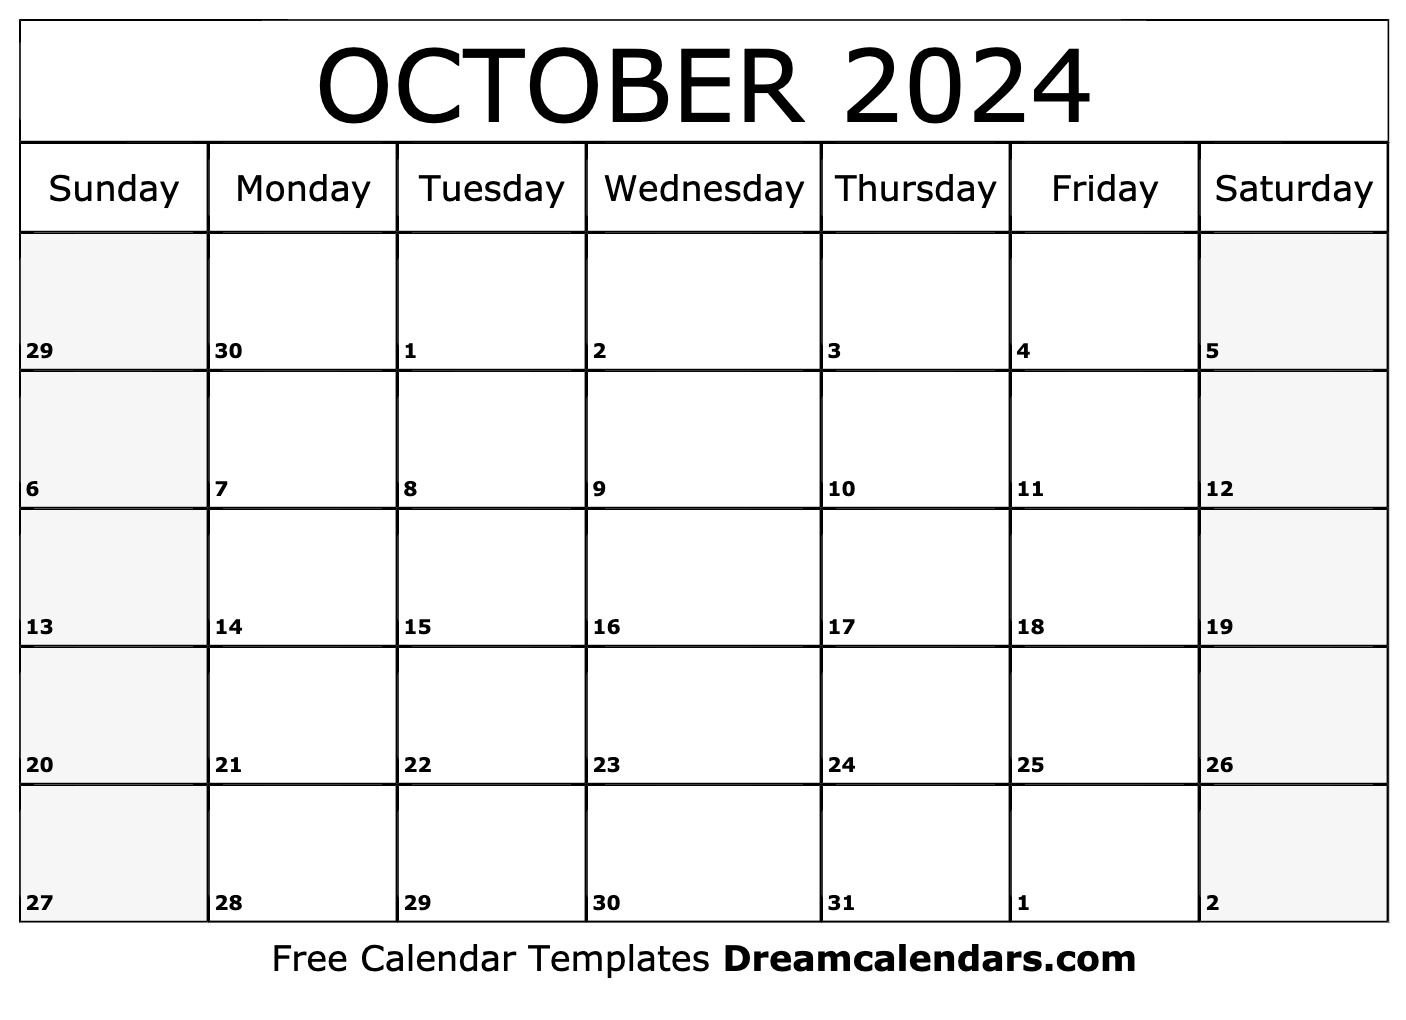 October 2024 Calendar | Free Blank Printable With Holidays for October 2024 Calendar With Holidays Printable